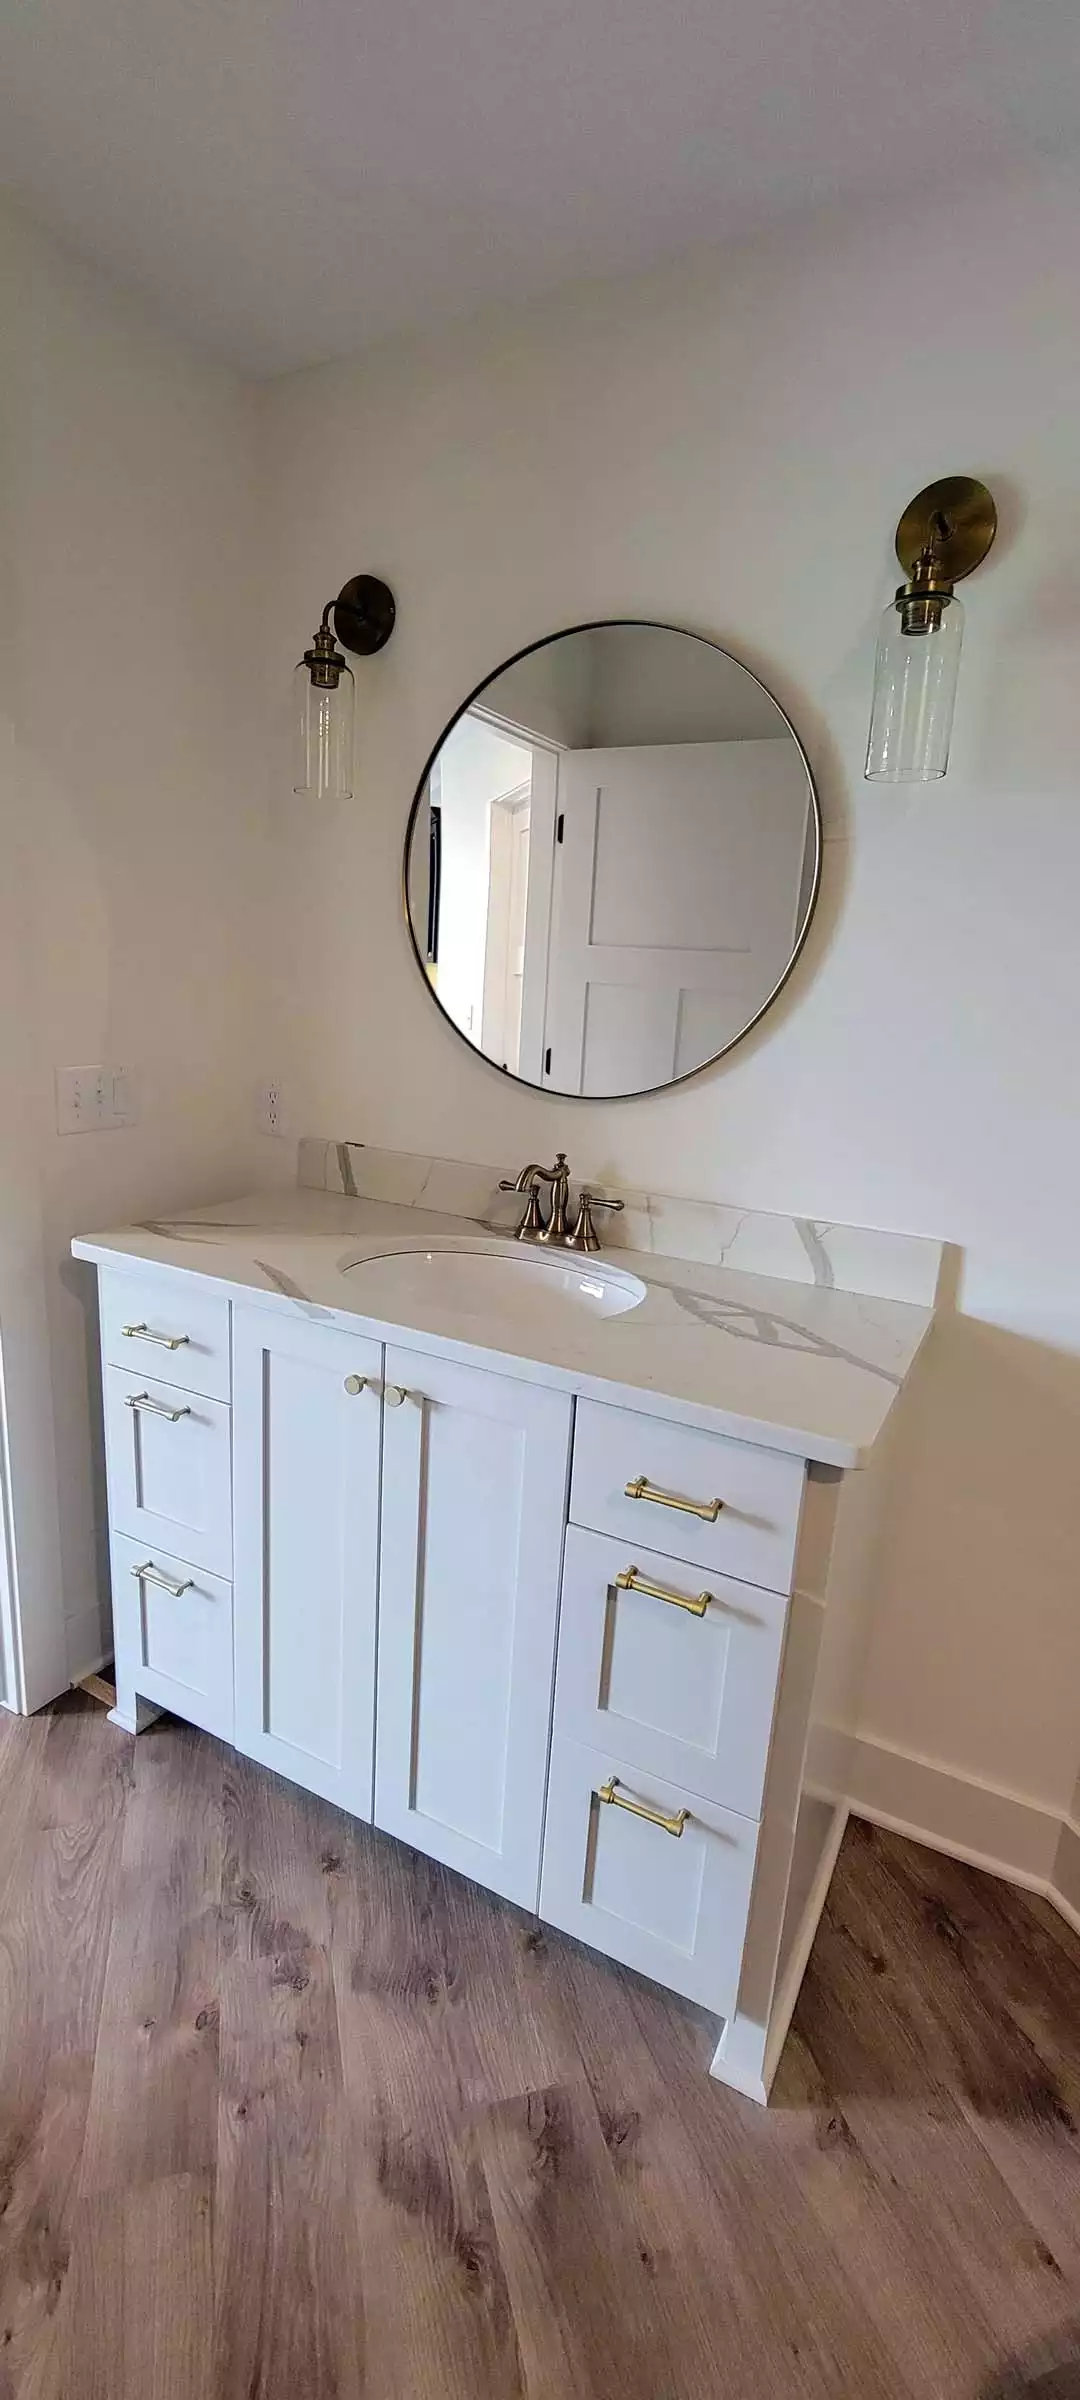 Single vanity with decorative mirror and lights